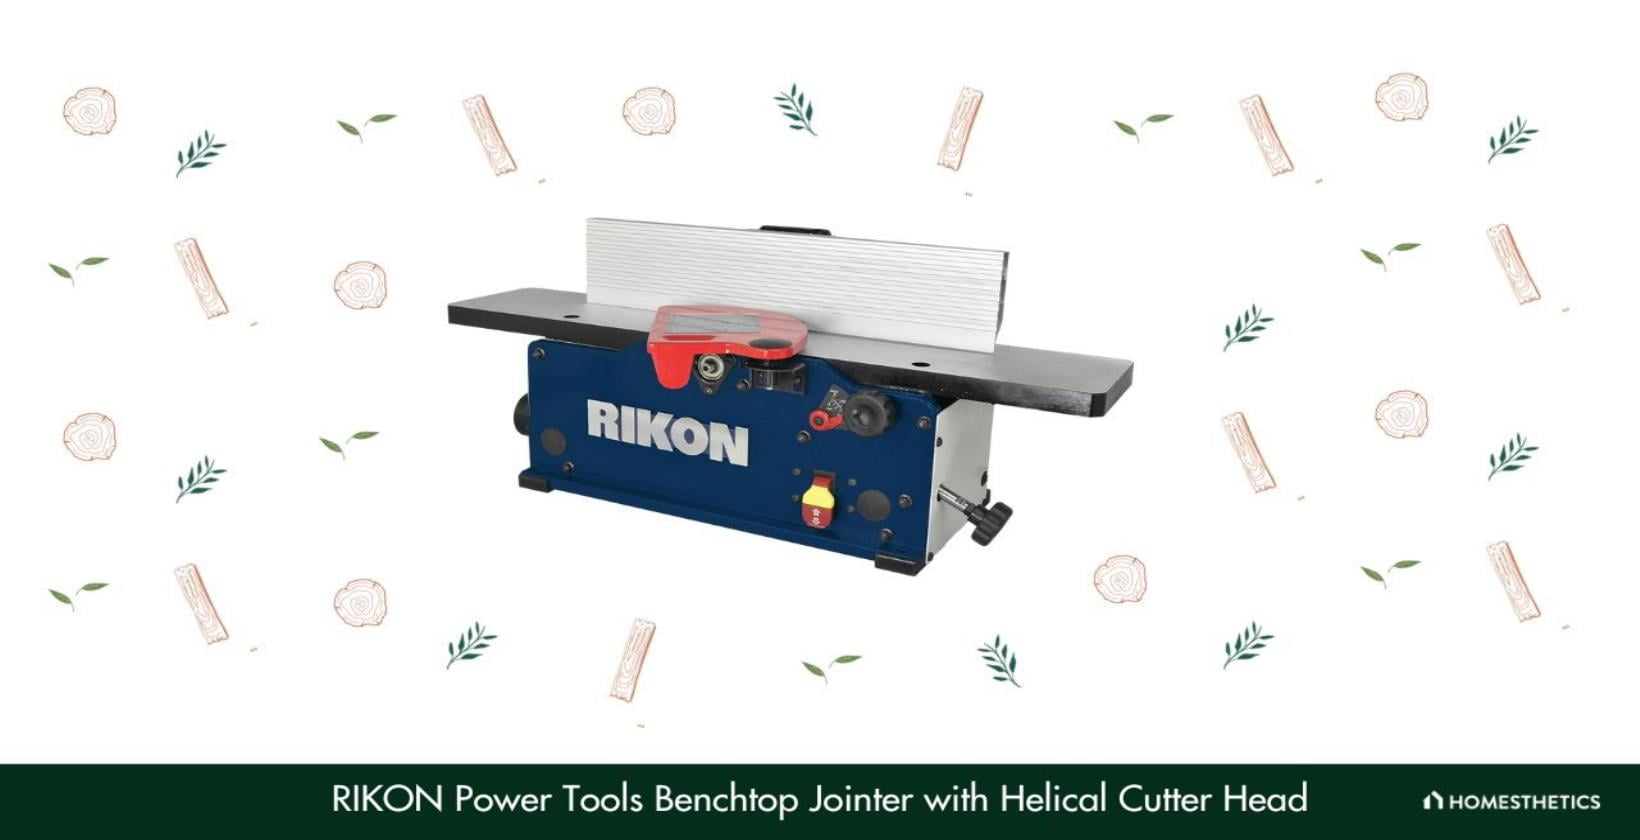 3. RIKON Power Tools Benchtop Jointer with Helical Cutter Head